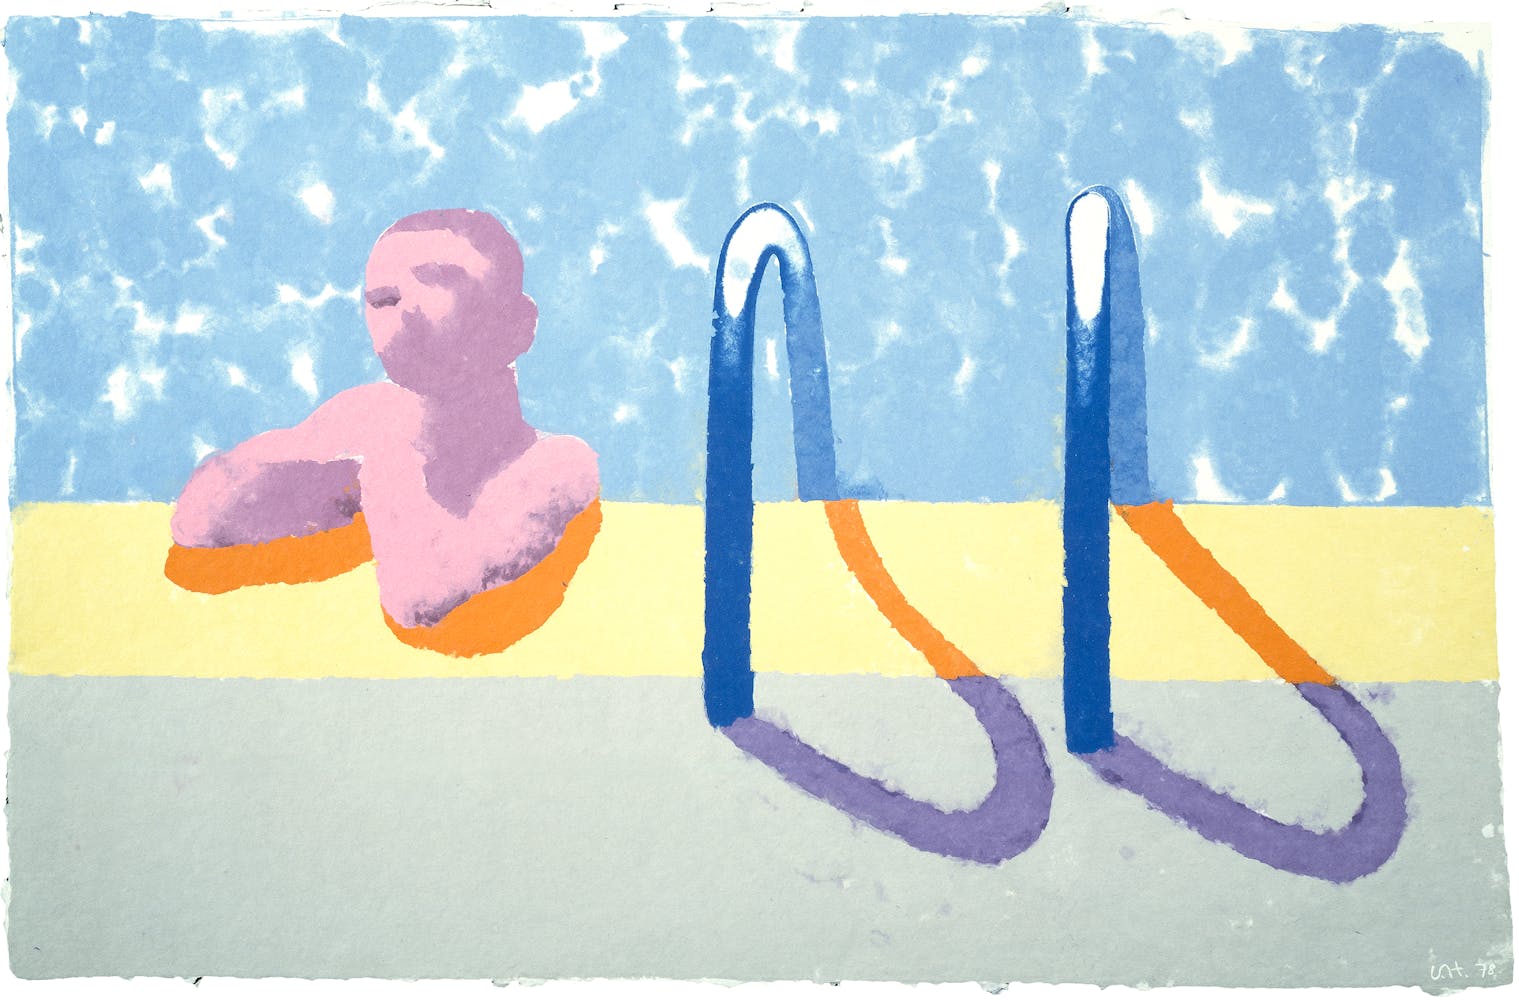 Colorful painting of pink figure in pool with arms resting on concrete